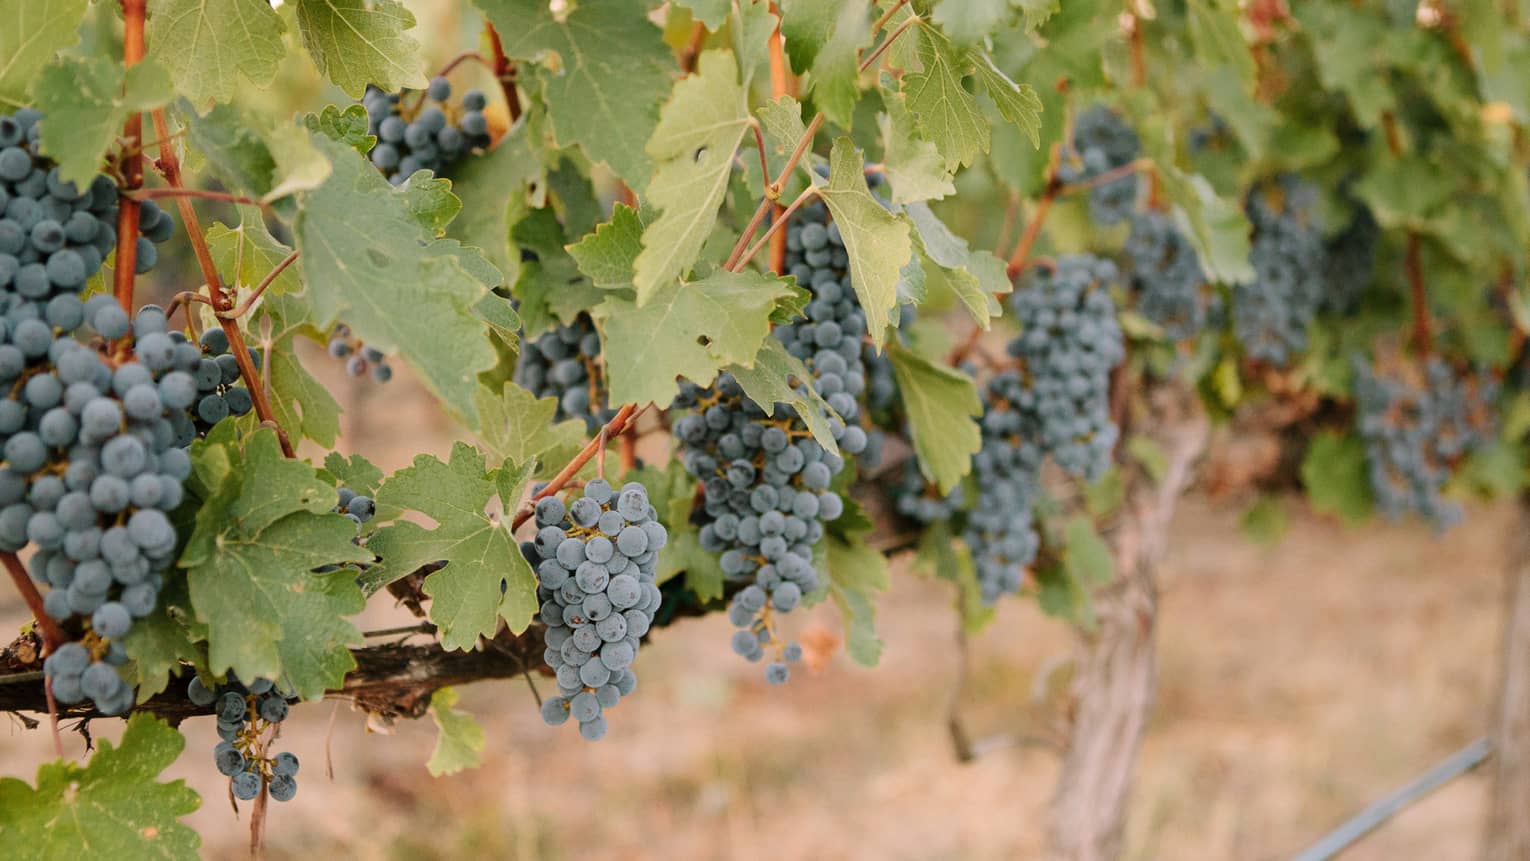 Bunches of purple wine grapes hang from lush vineyards in Napa Valley